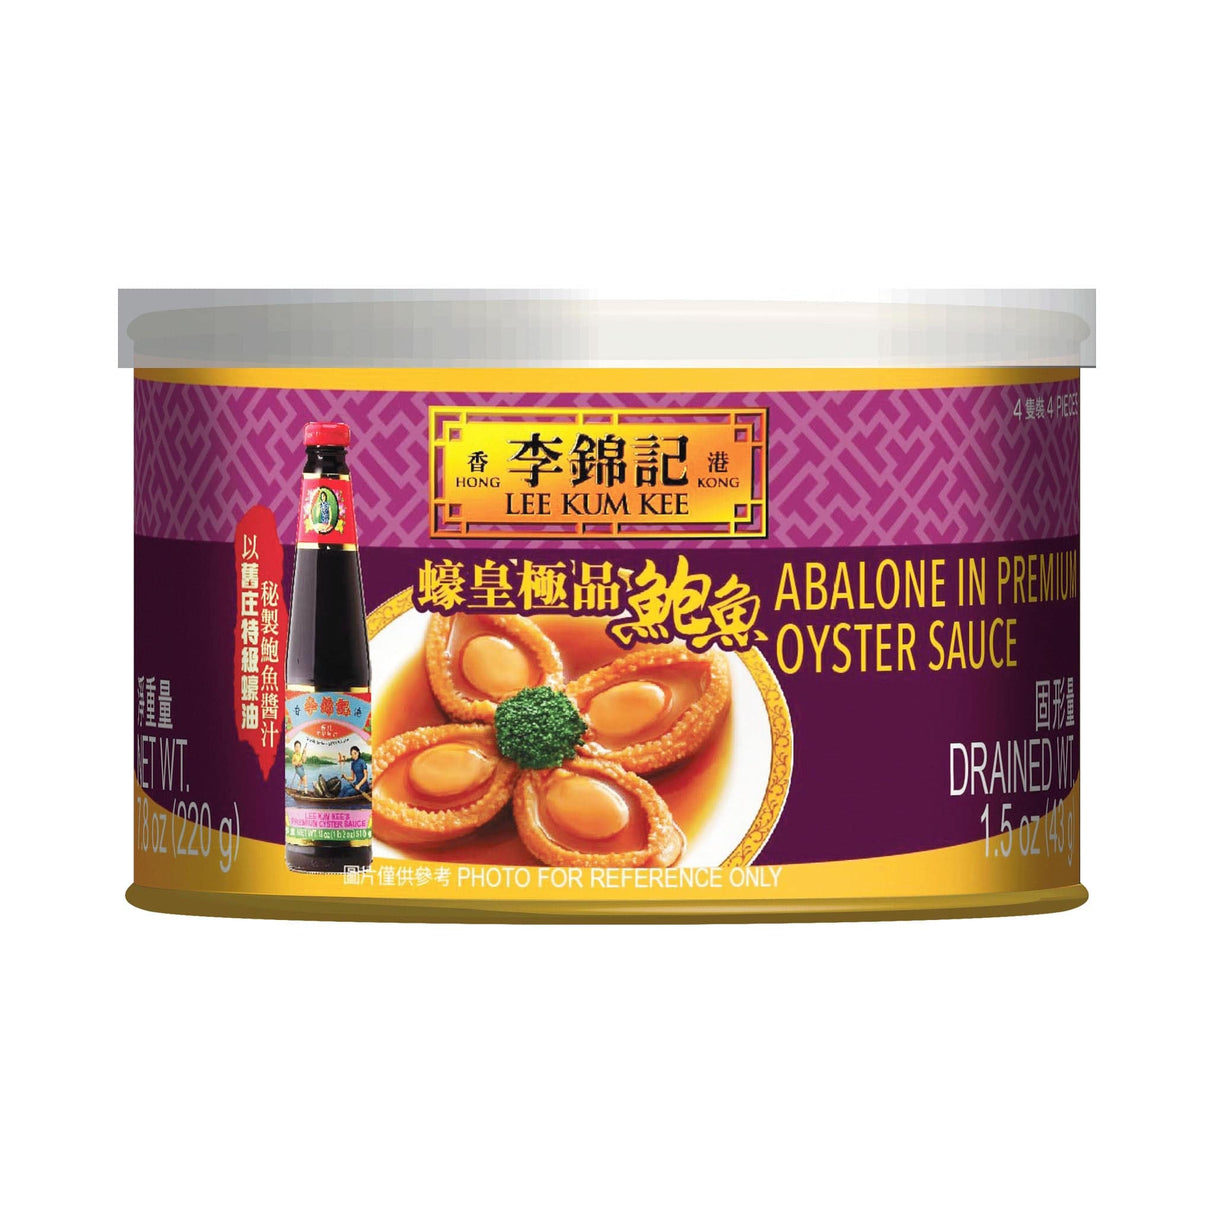 Lee Kum Kee Abalone in Premium Oyster Sauce